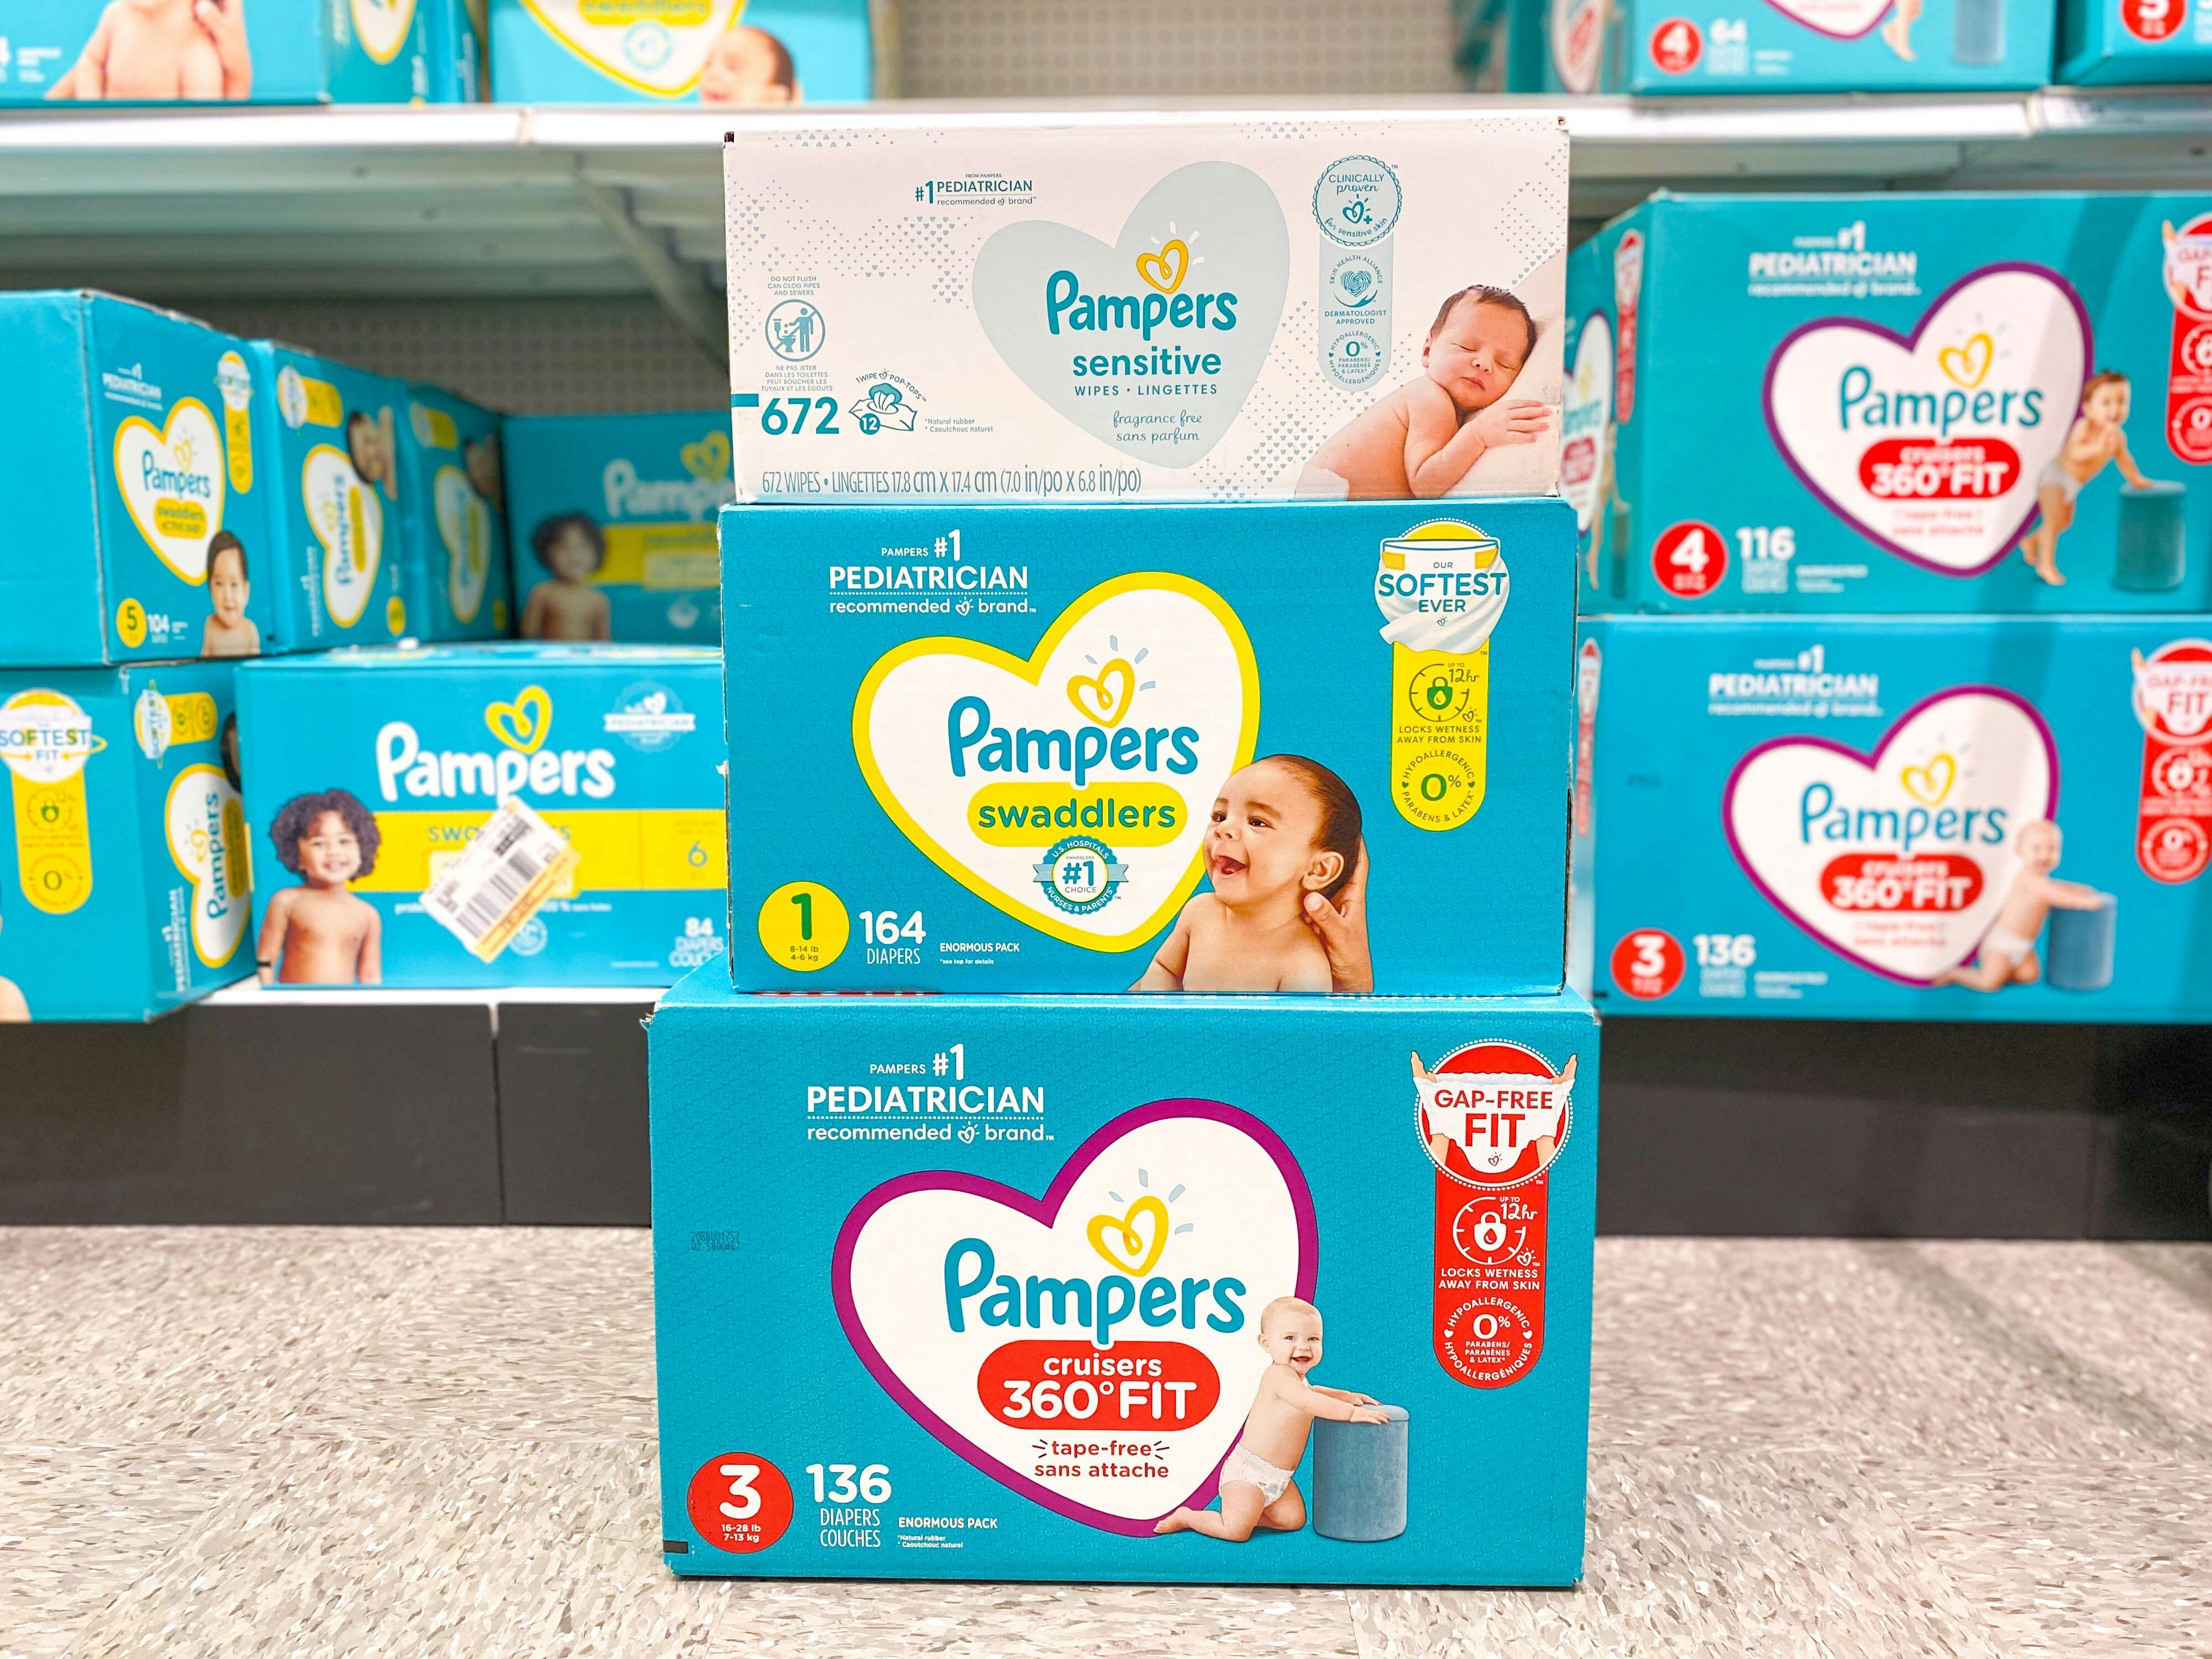 three boxes of Pampers stacked in a store aisle